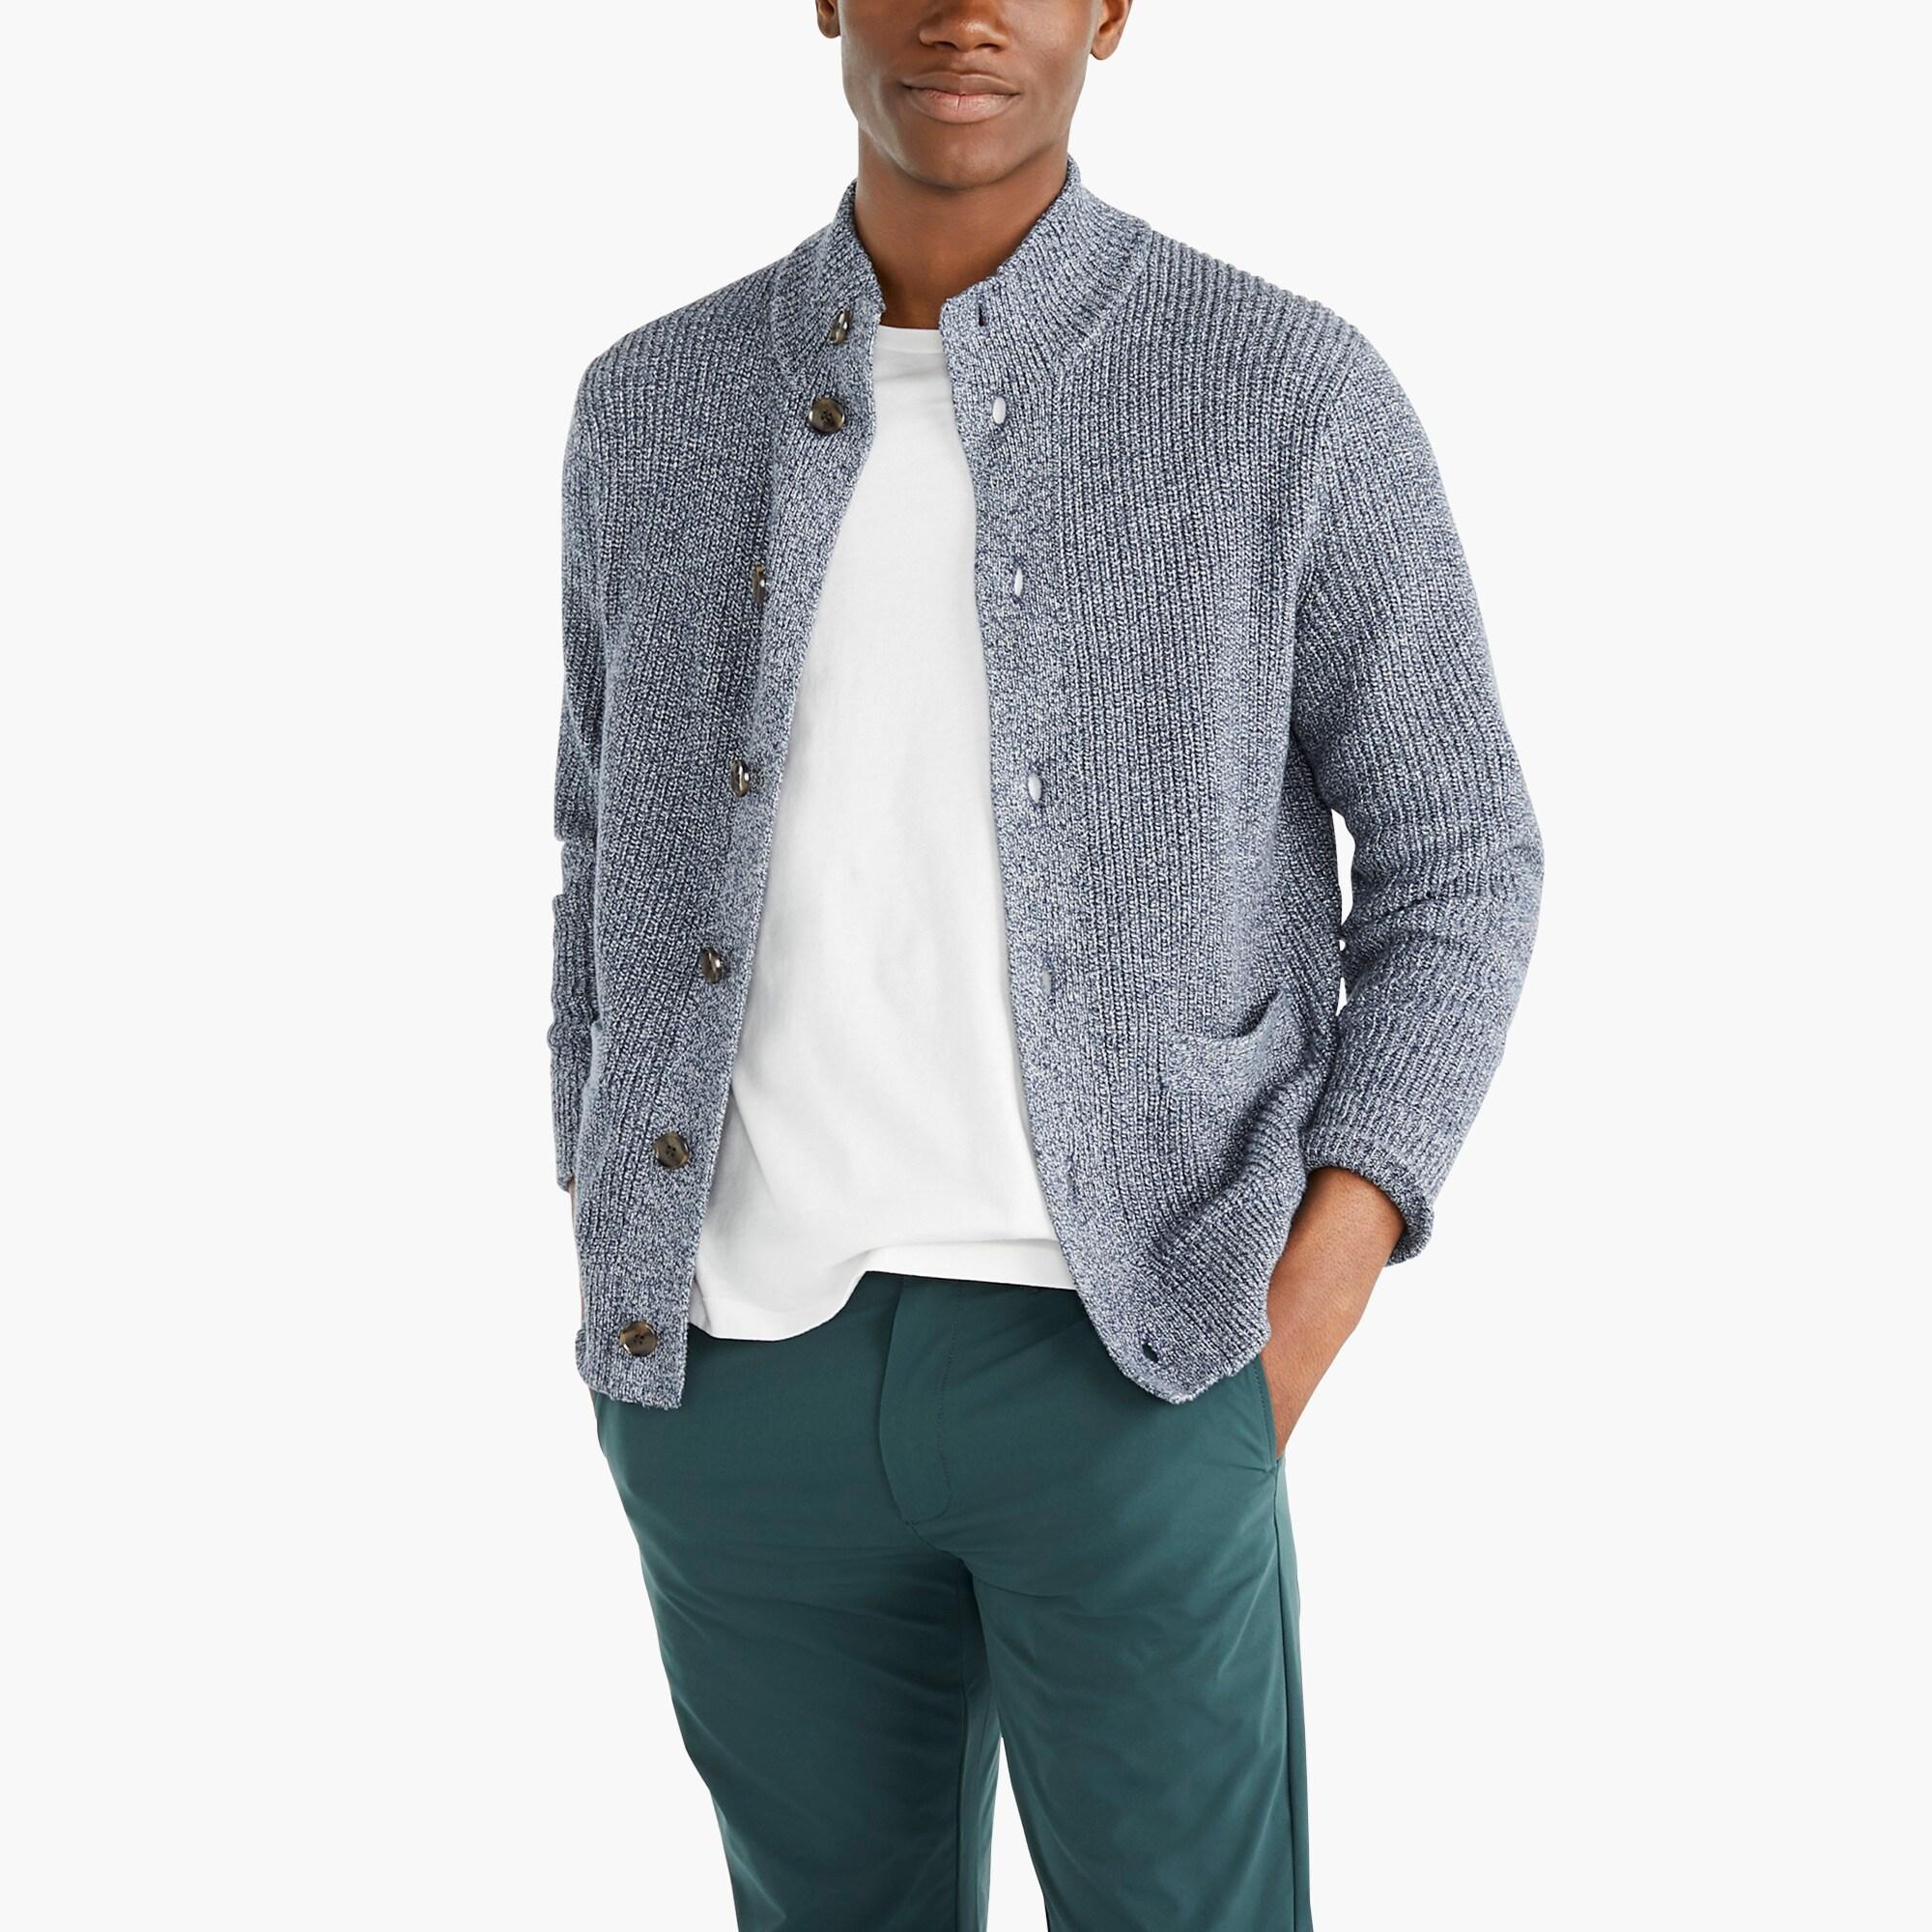 J.Crew Marled Cotton Sweater Cardigan in Blue for Men - Lyst